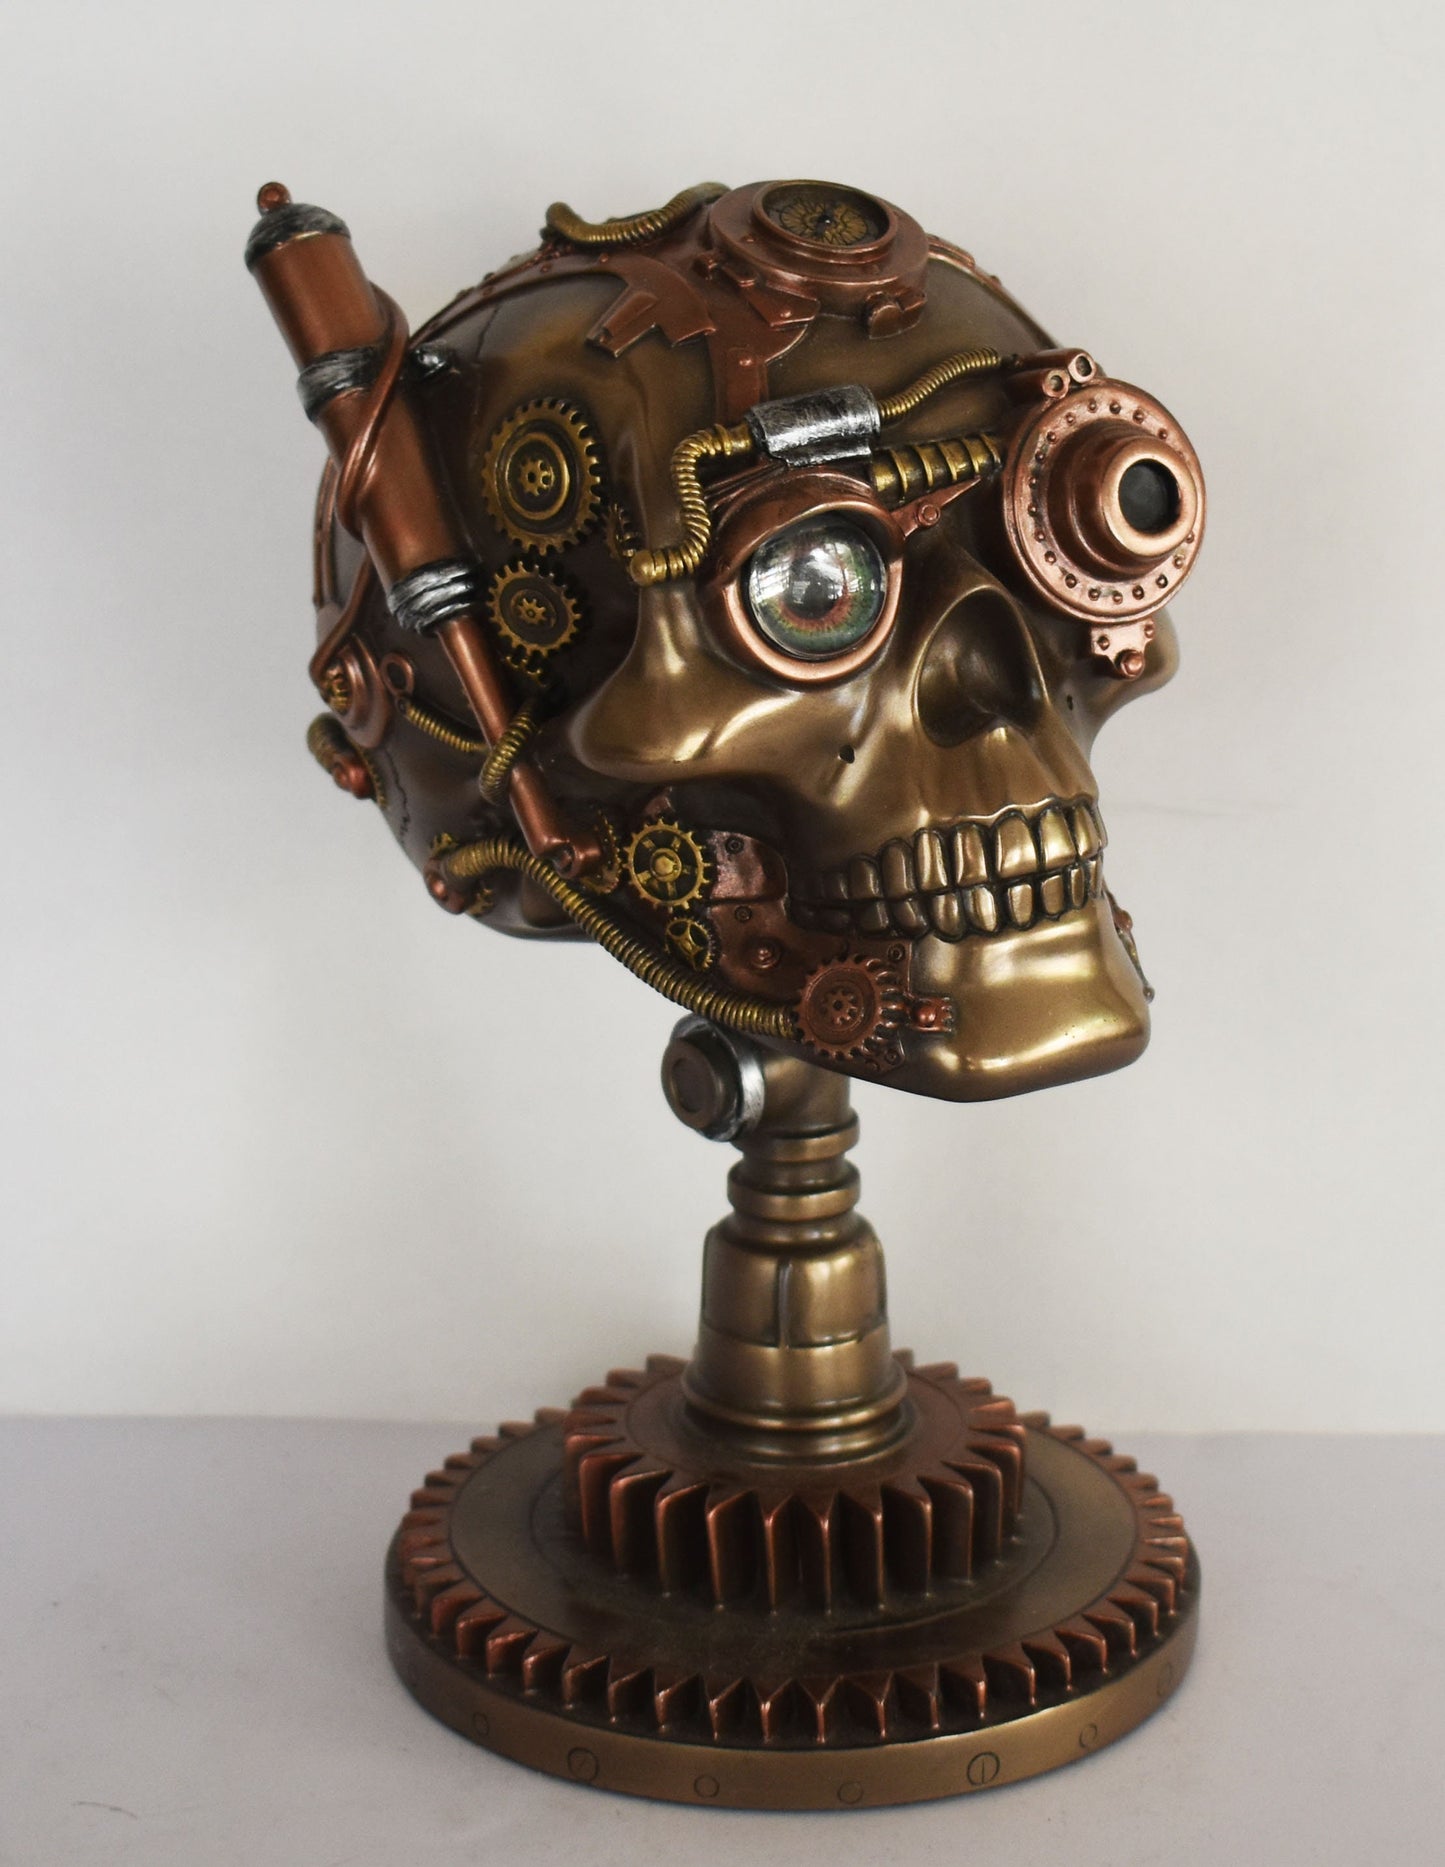 Based Scull  - Steampunk - Modern Art - Decoration - Cold Cast Bronze Resin